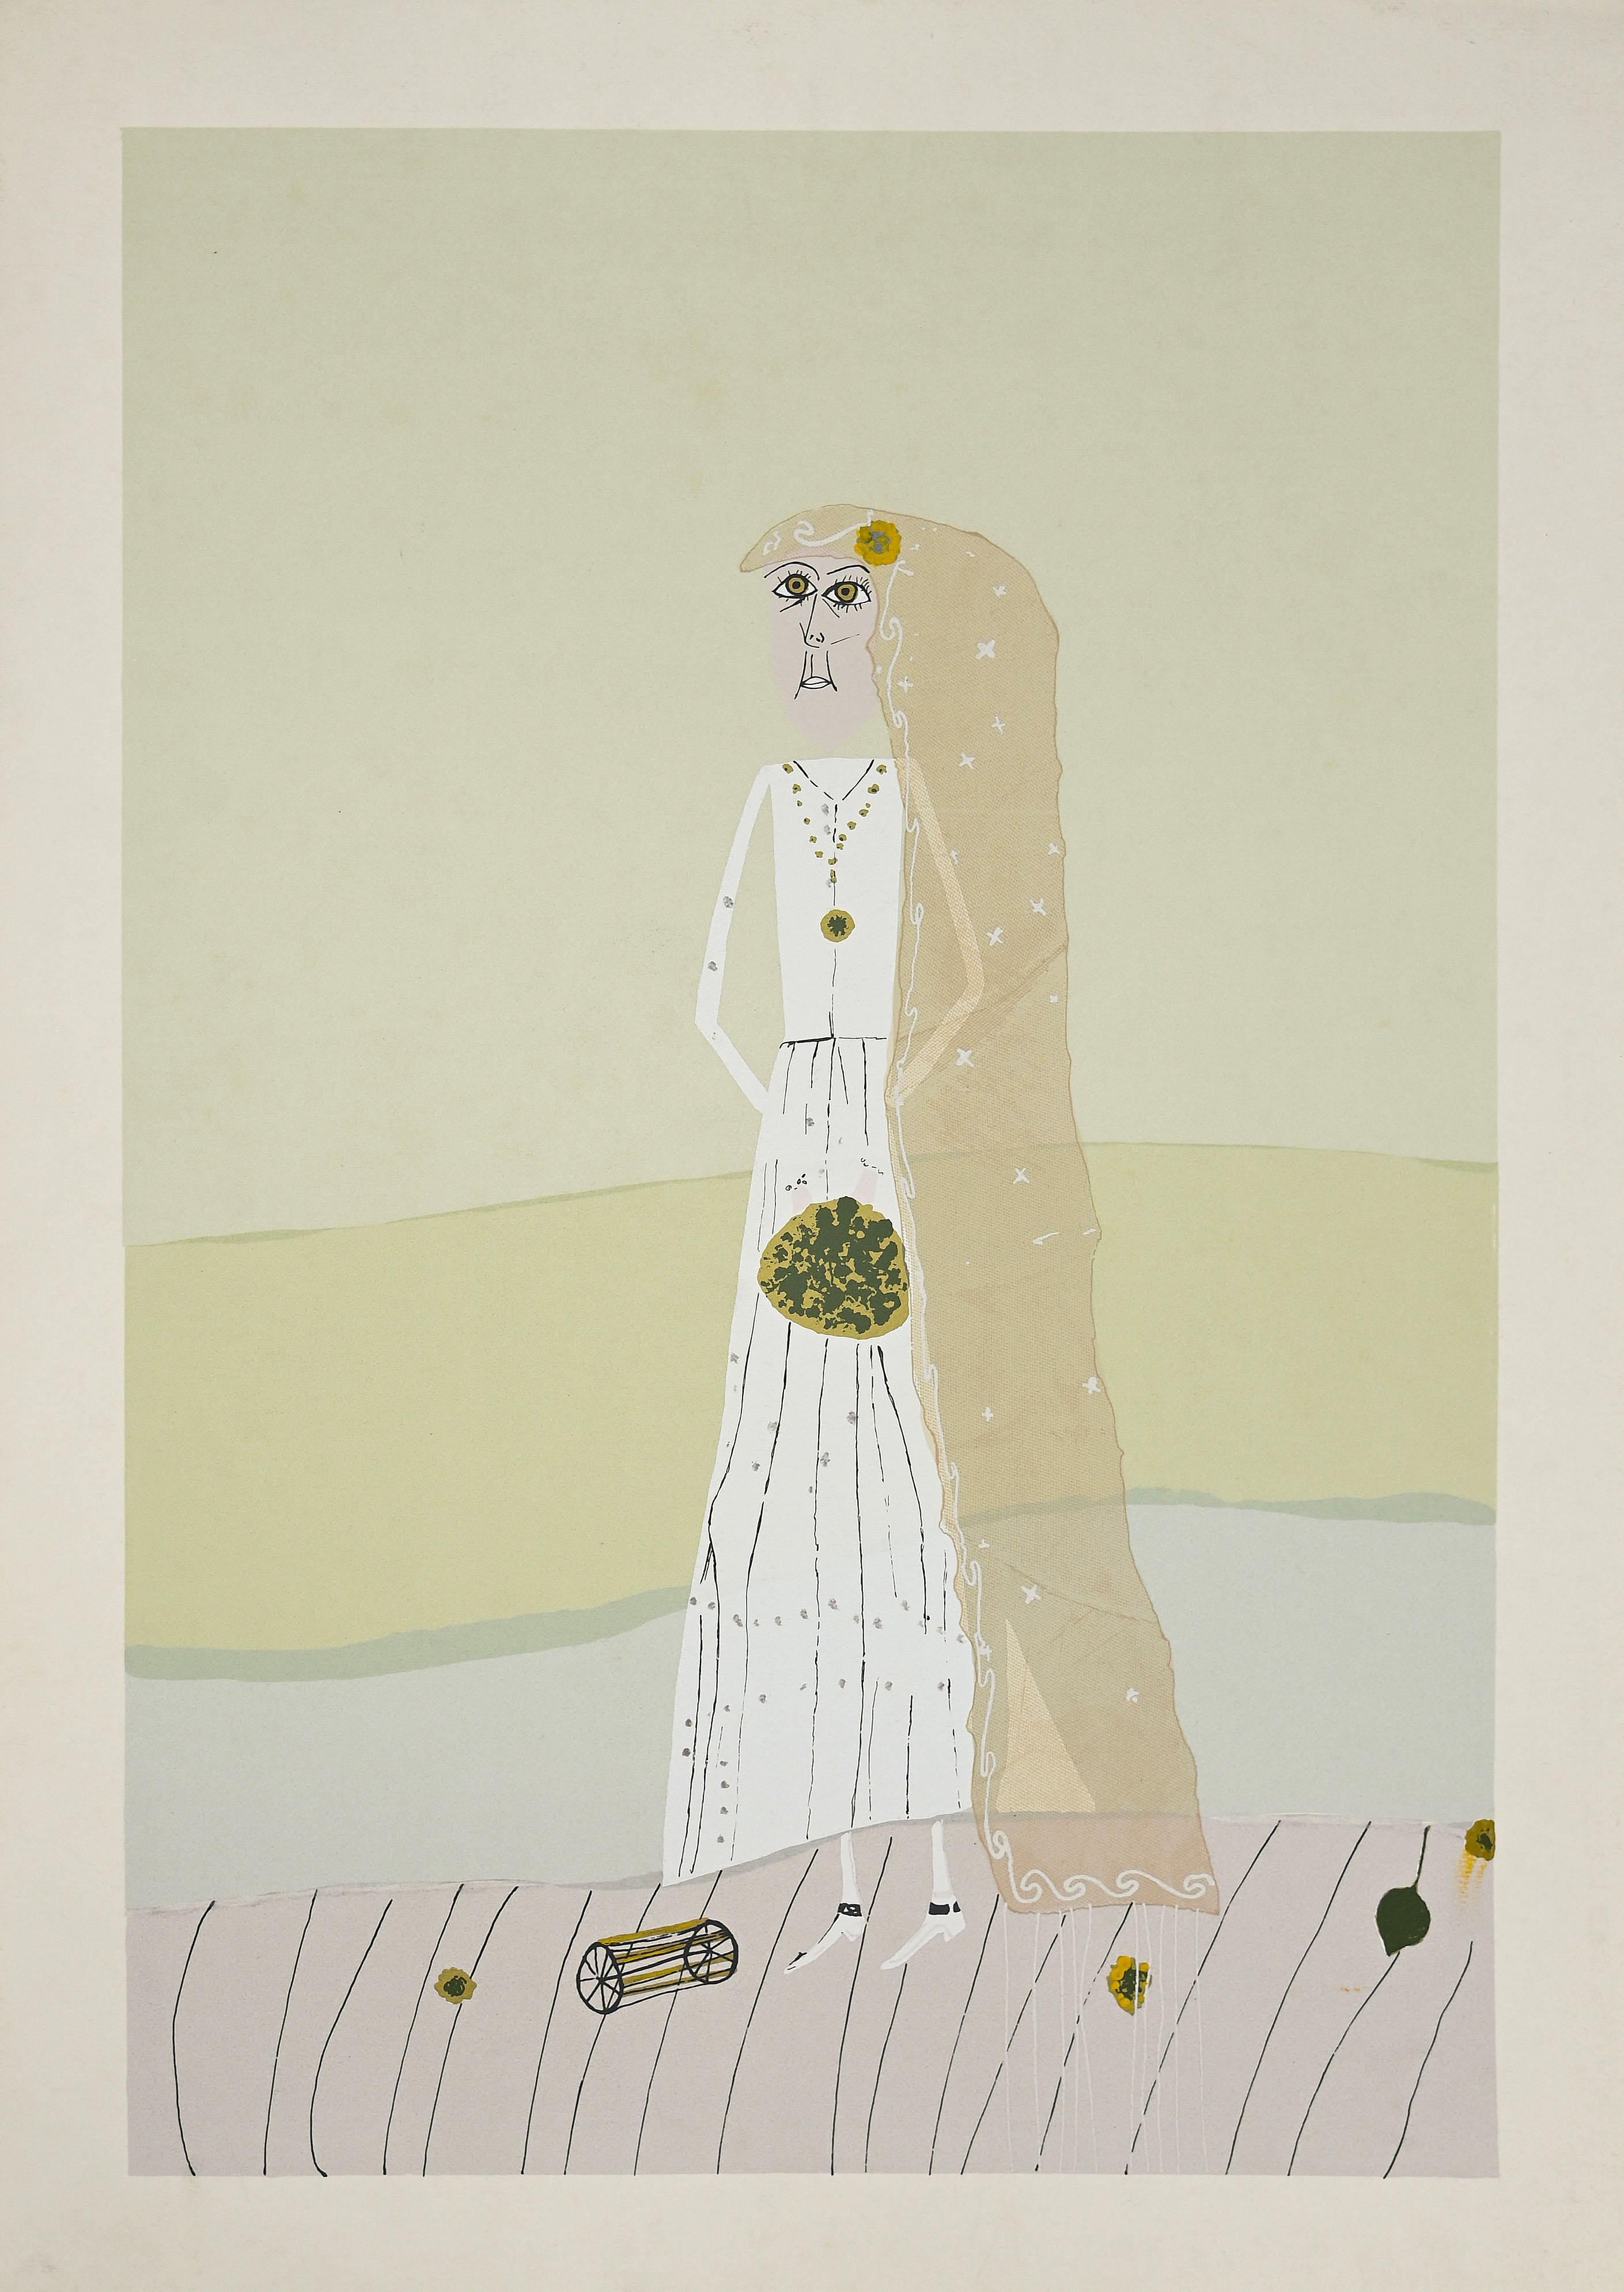 The Bride - Lithograph on Paper by Gabrijel Stupika - Late 20th Century